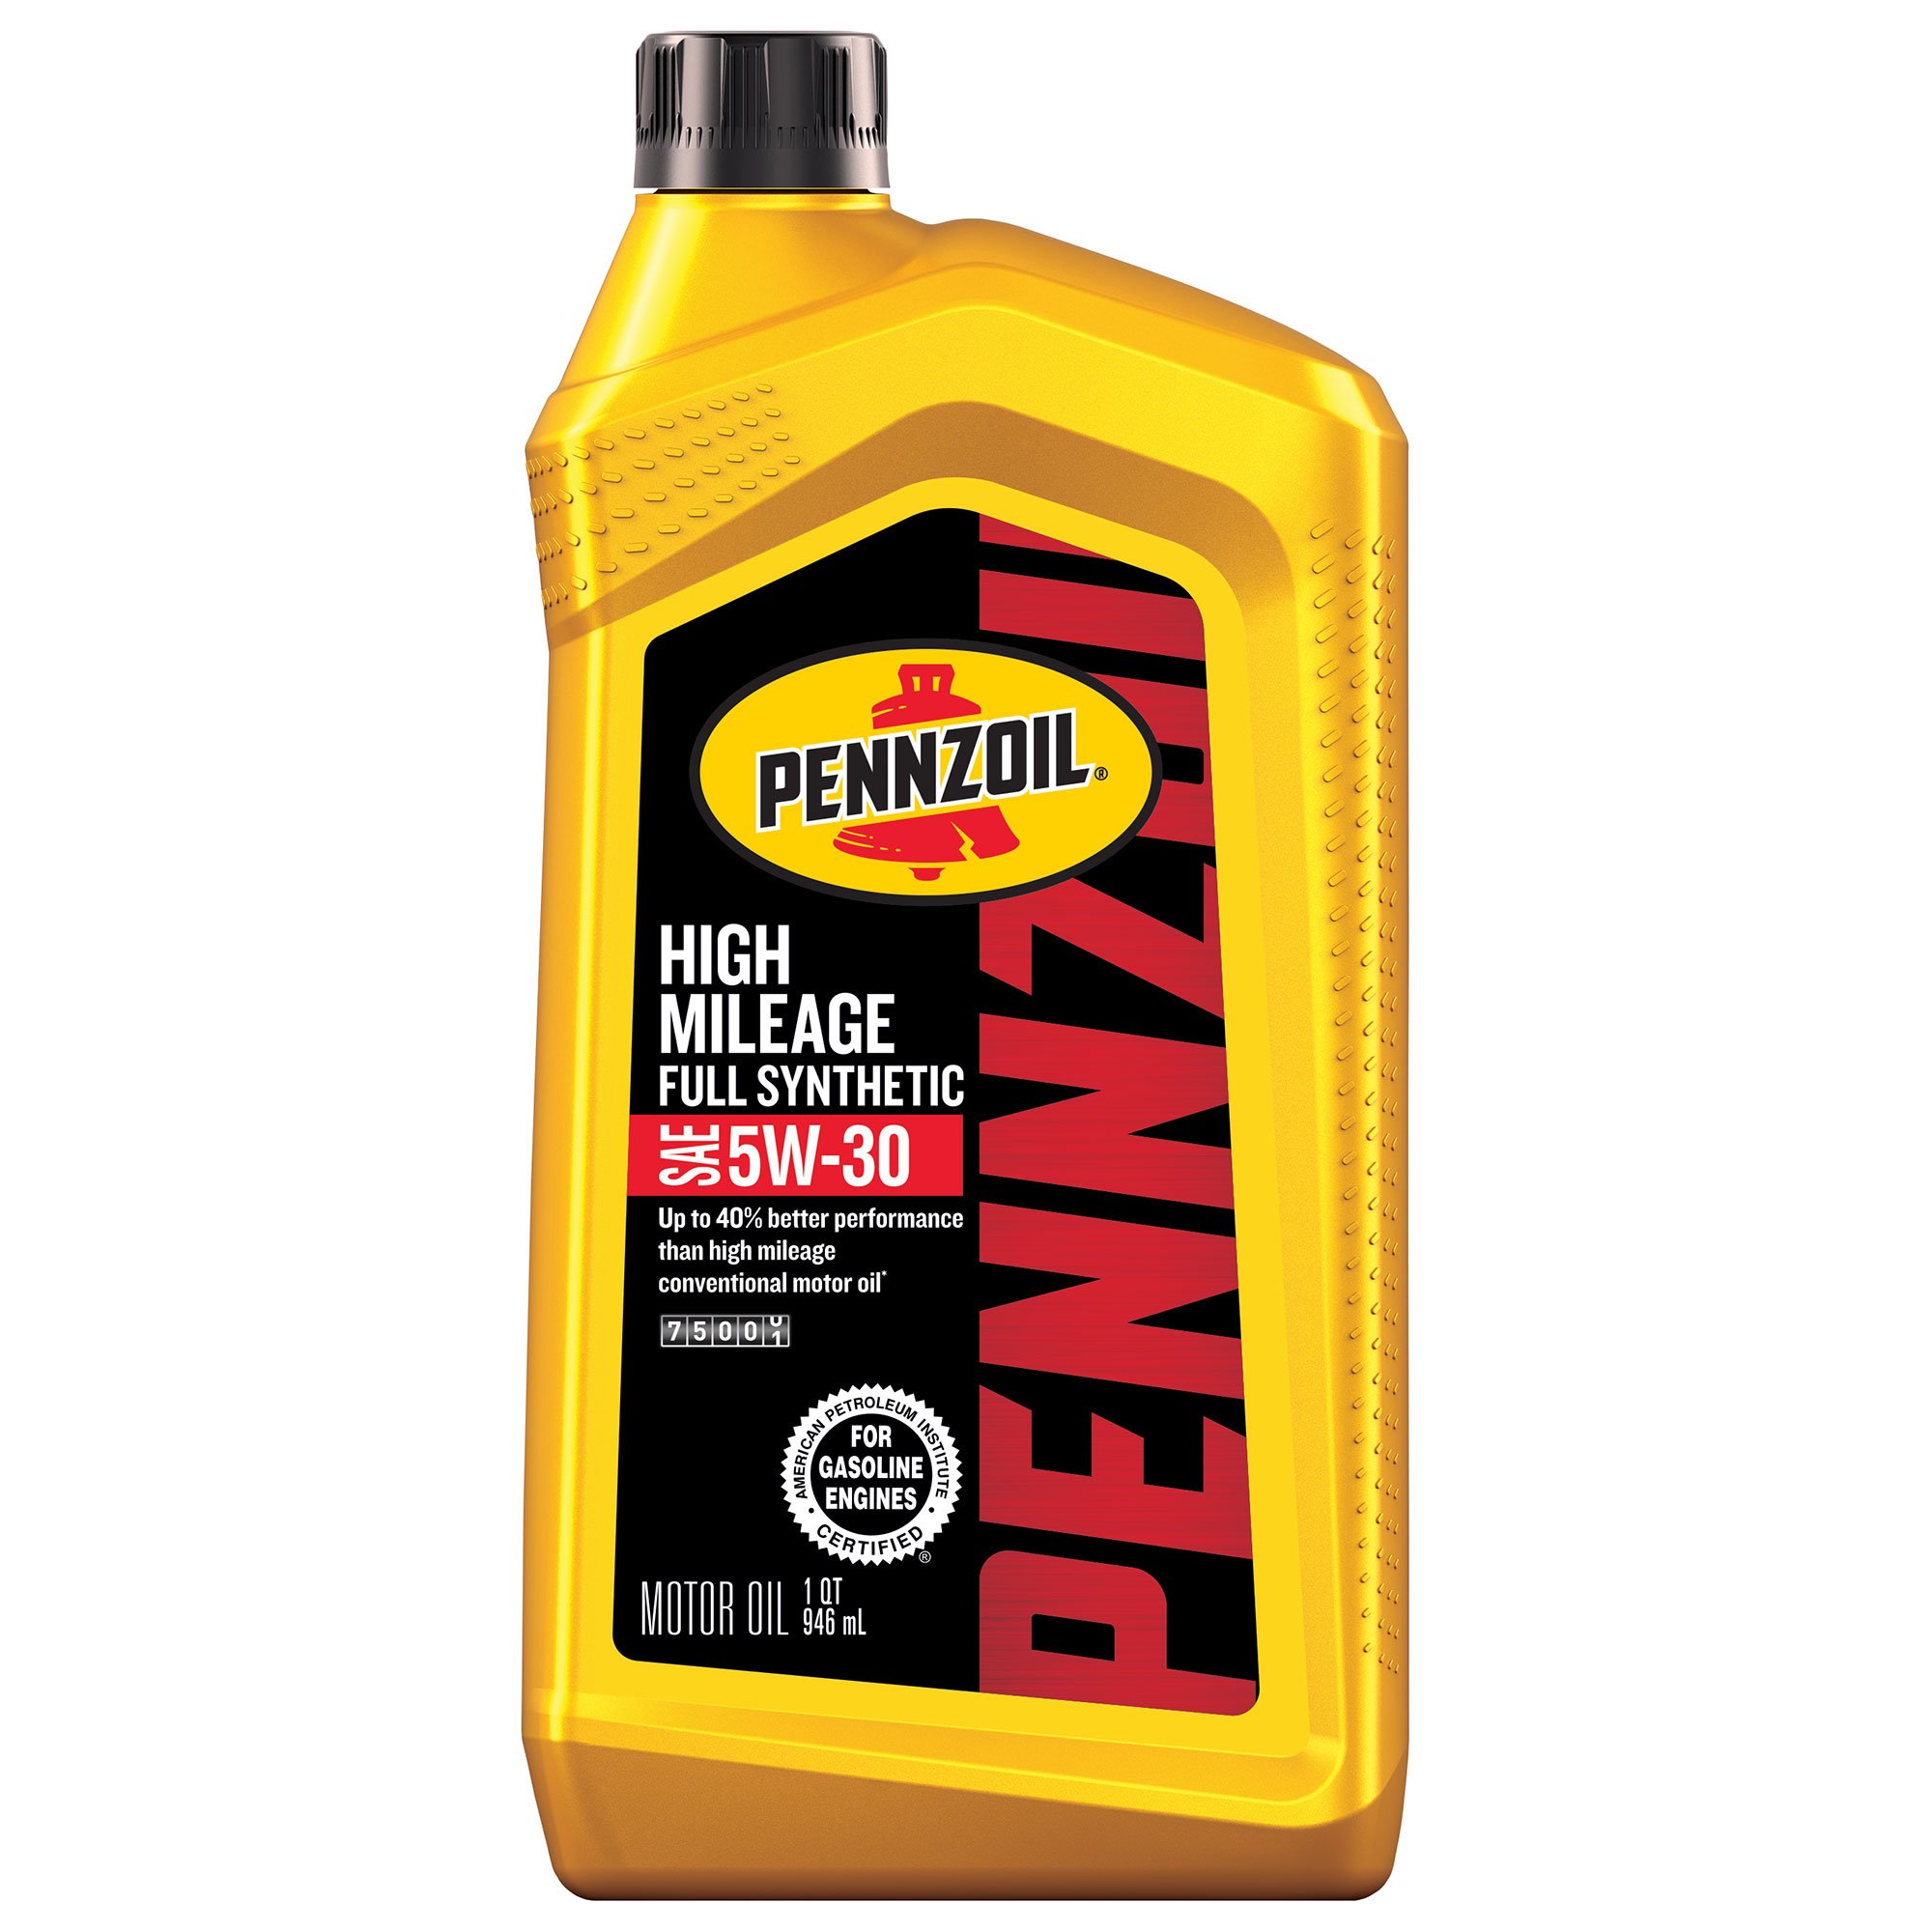 pennzoil-high-mileage-full-synthetic-sae-5w-30-motor-oil-shop-motor